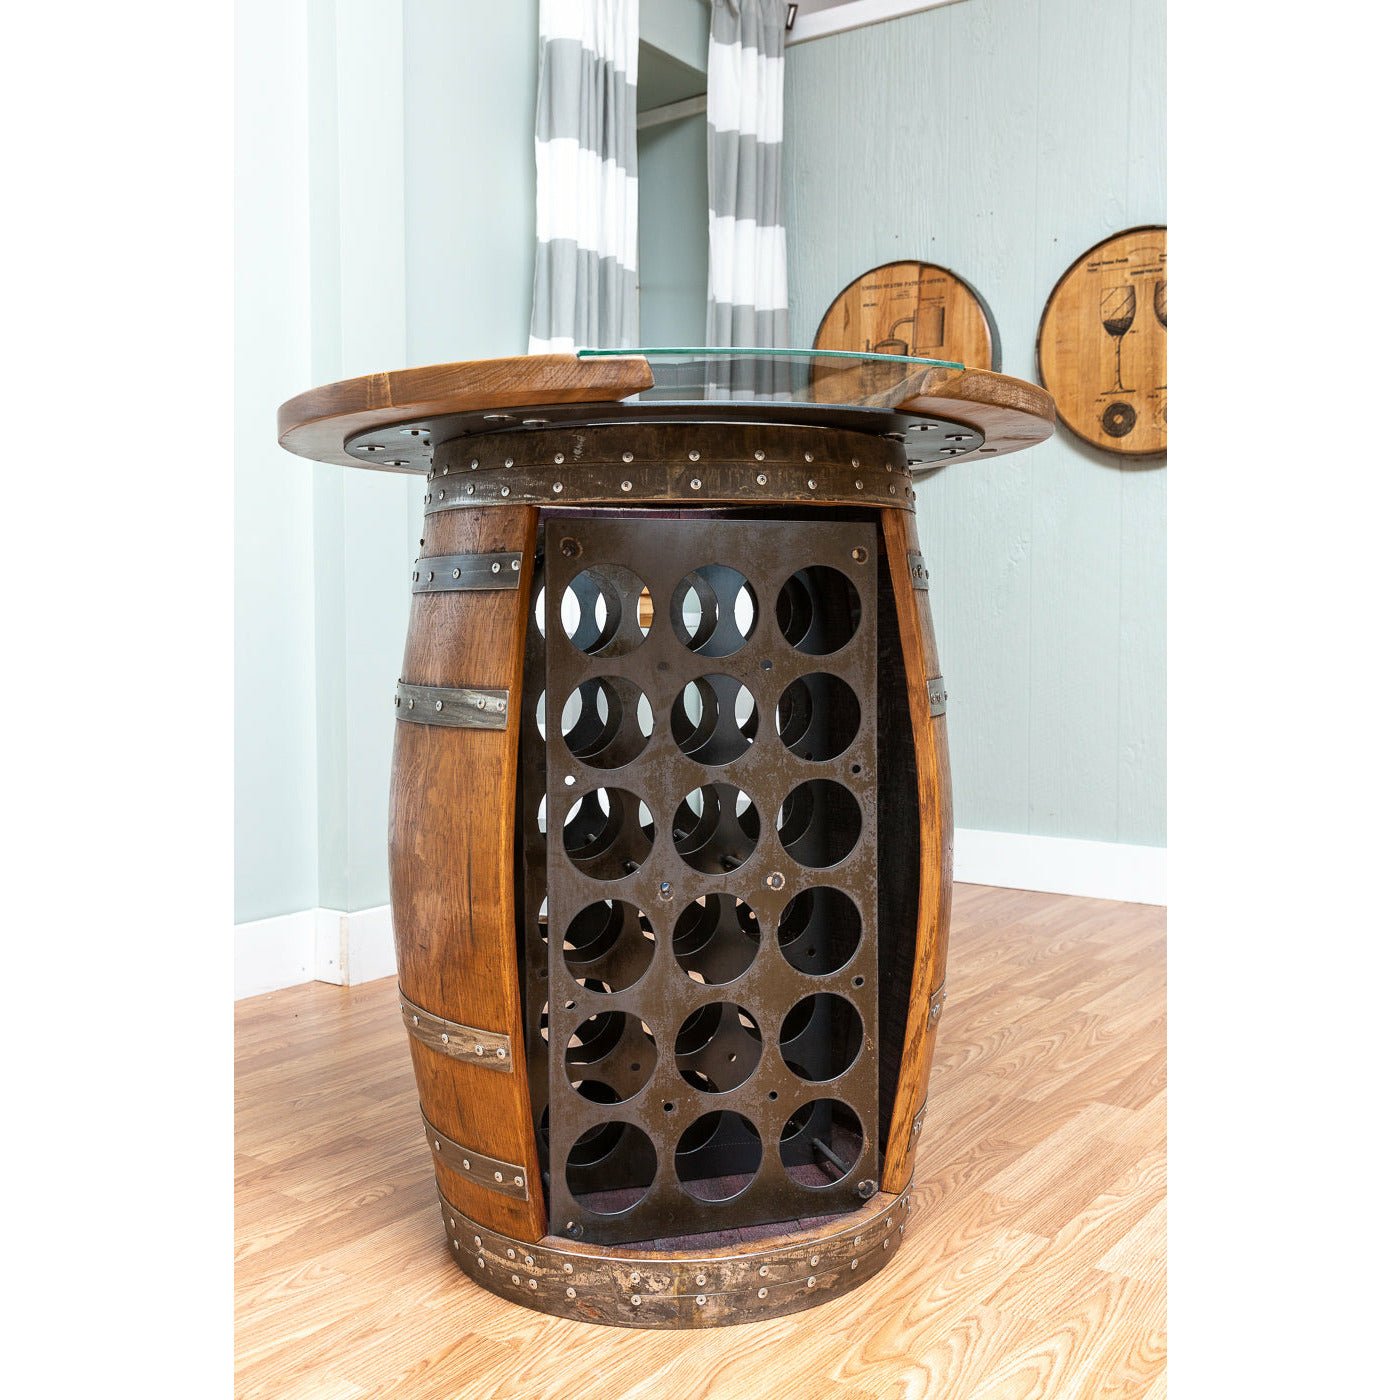 Napa East Wine Storage Table: 36″ Round Top - The Bar Design